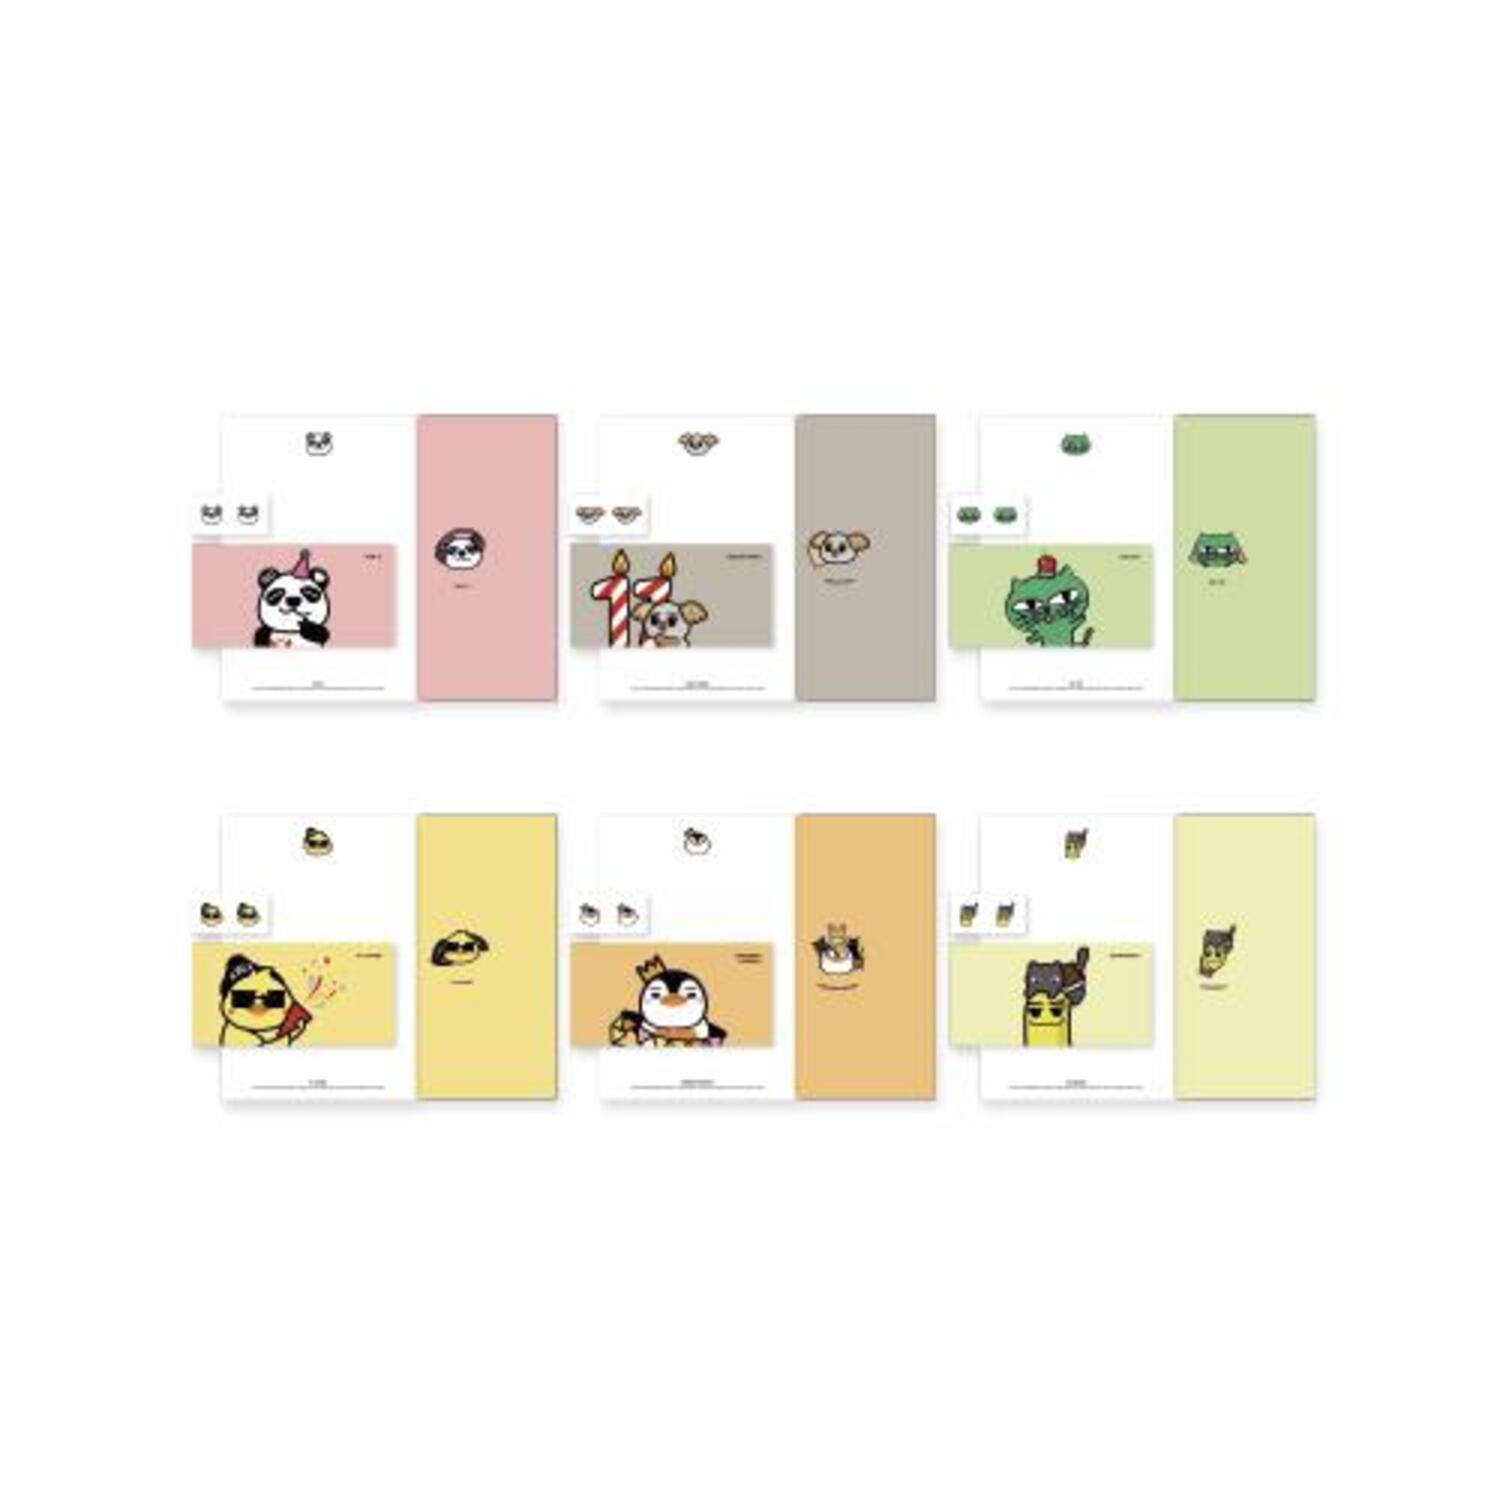 2PM - A11 TIME 2PM OFFICIAL MD / 편지지 세트(LETTER SET)